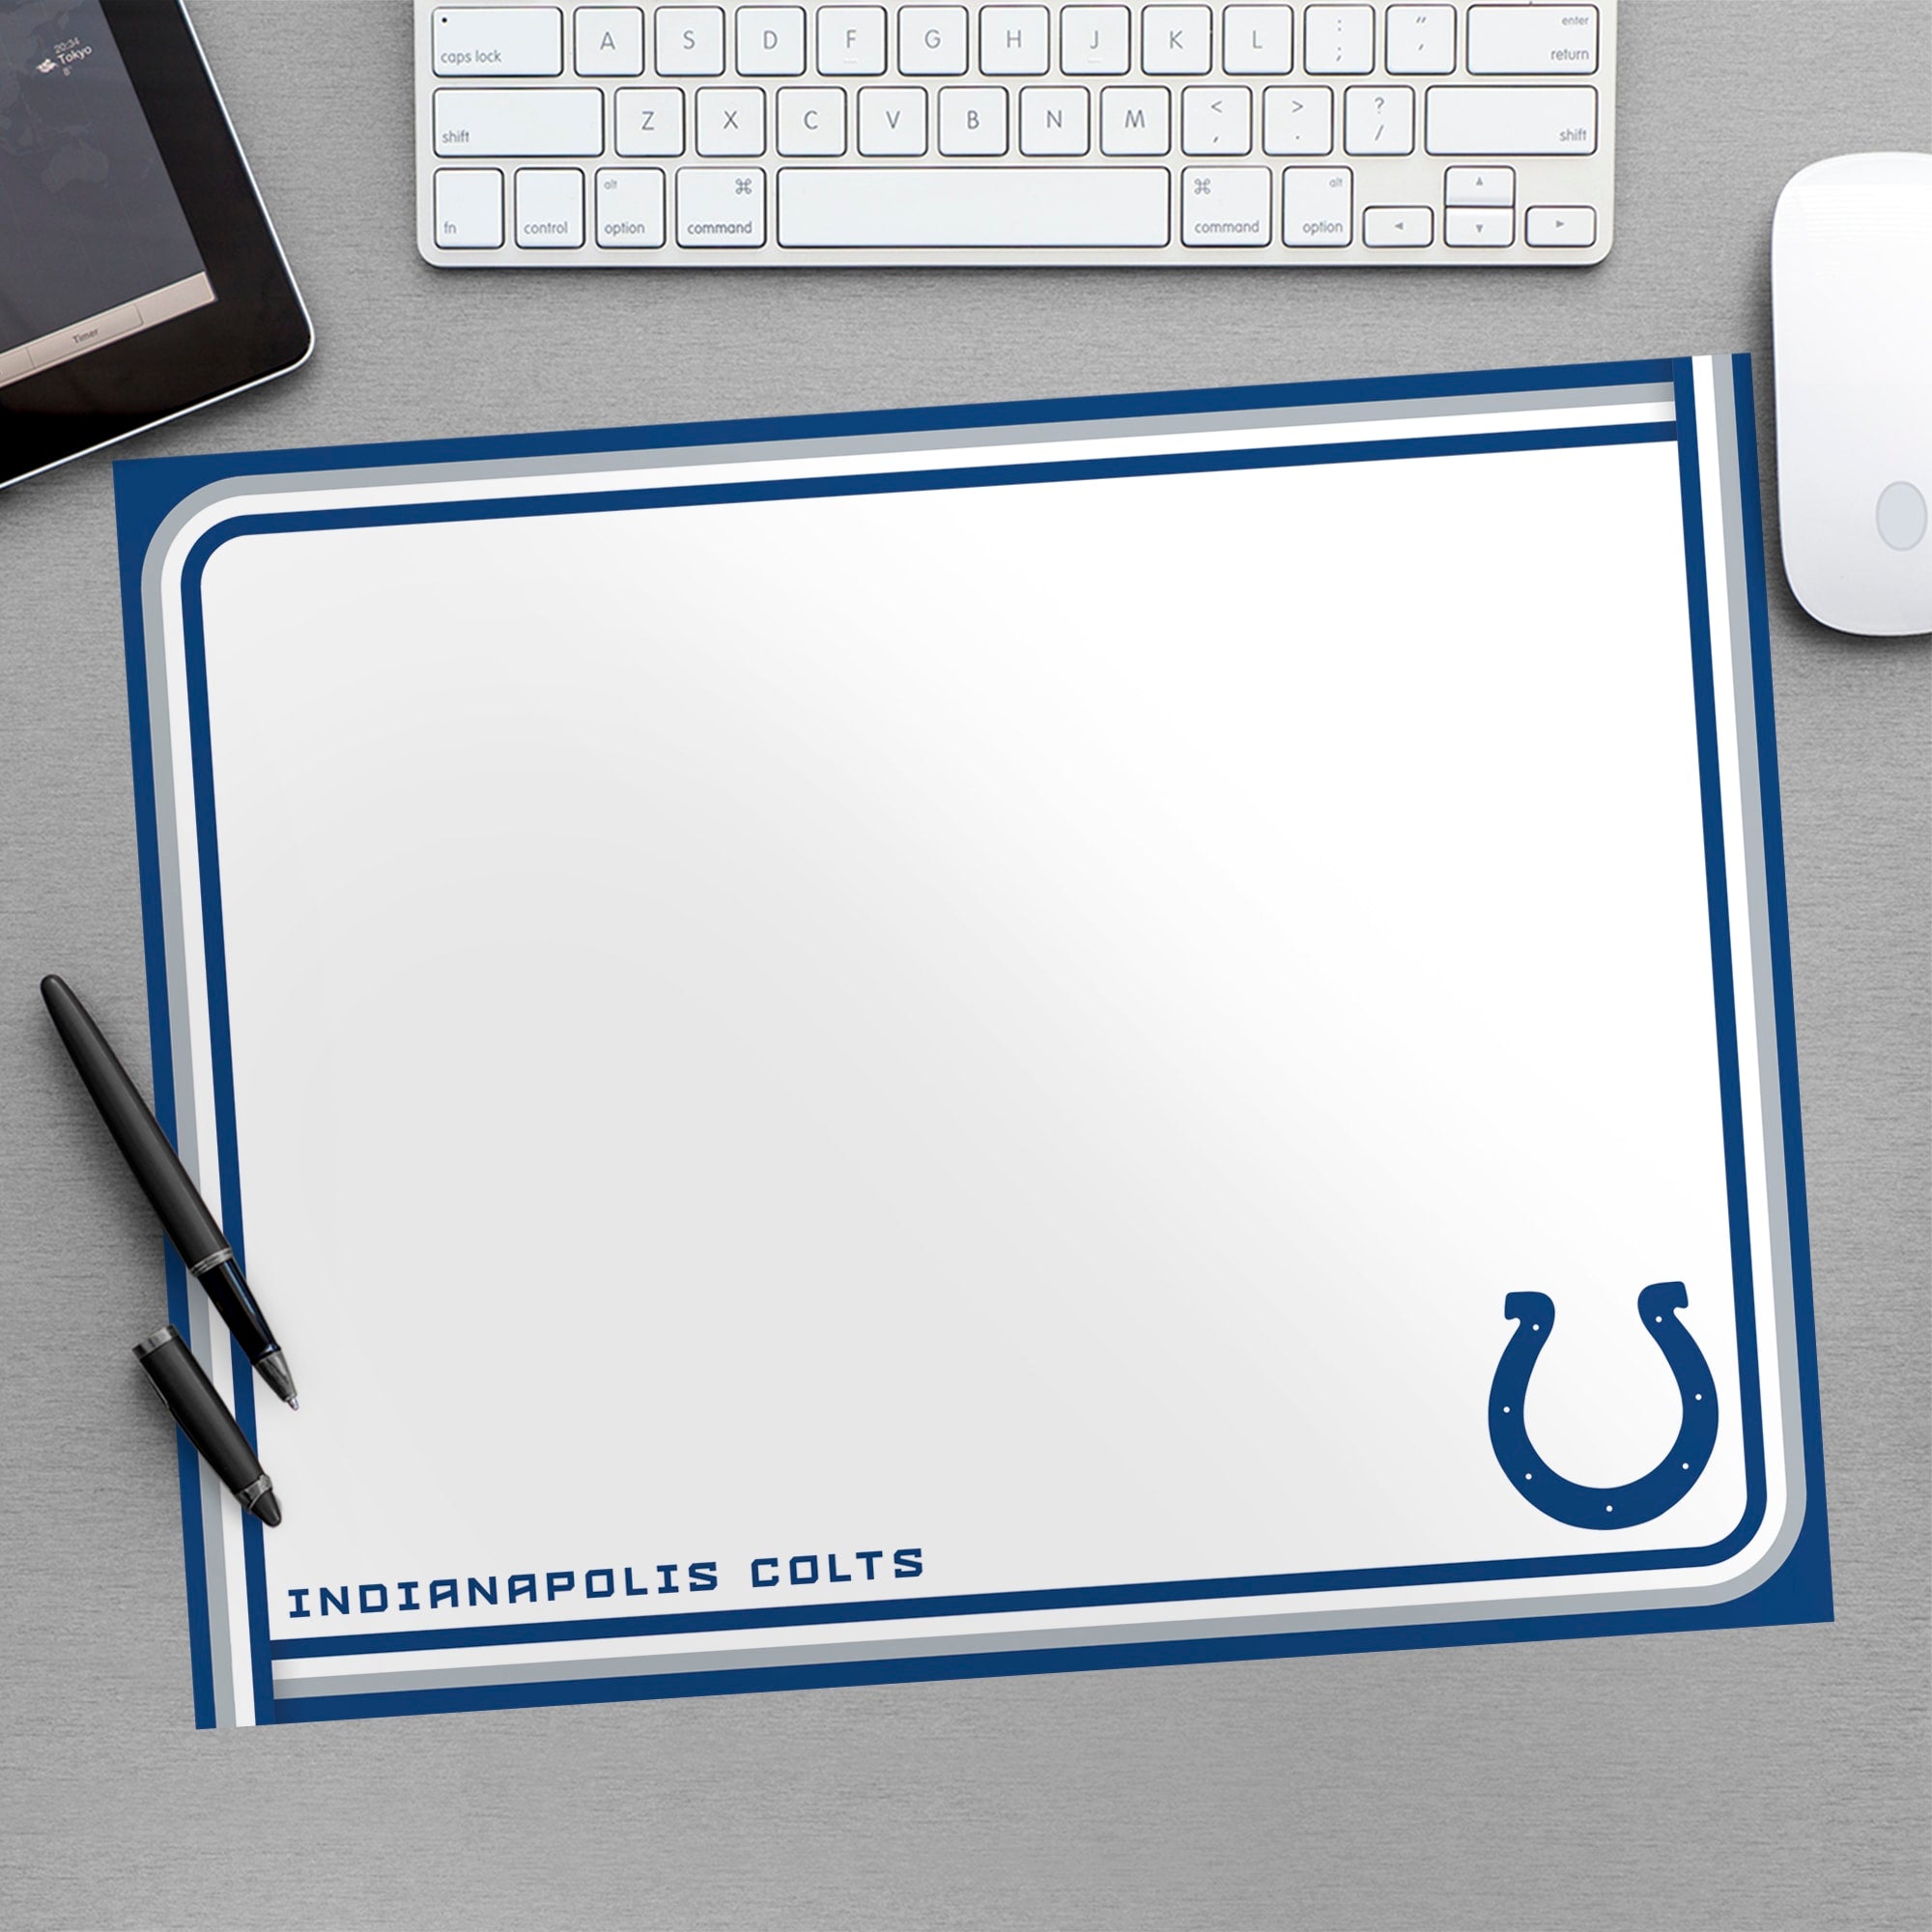 Indianapolis Colts: Dry Erase Whiteboard - Officially Licensed NFL Removable Wall Decal Large by Fathead | Vinyl